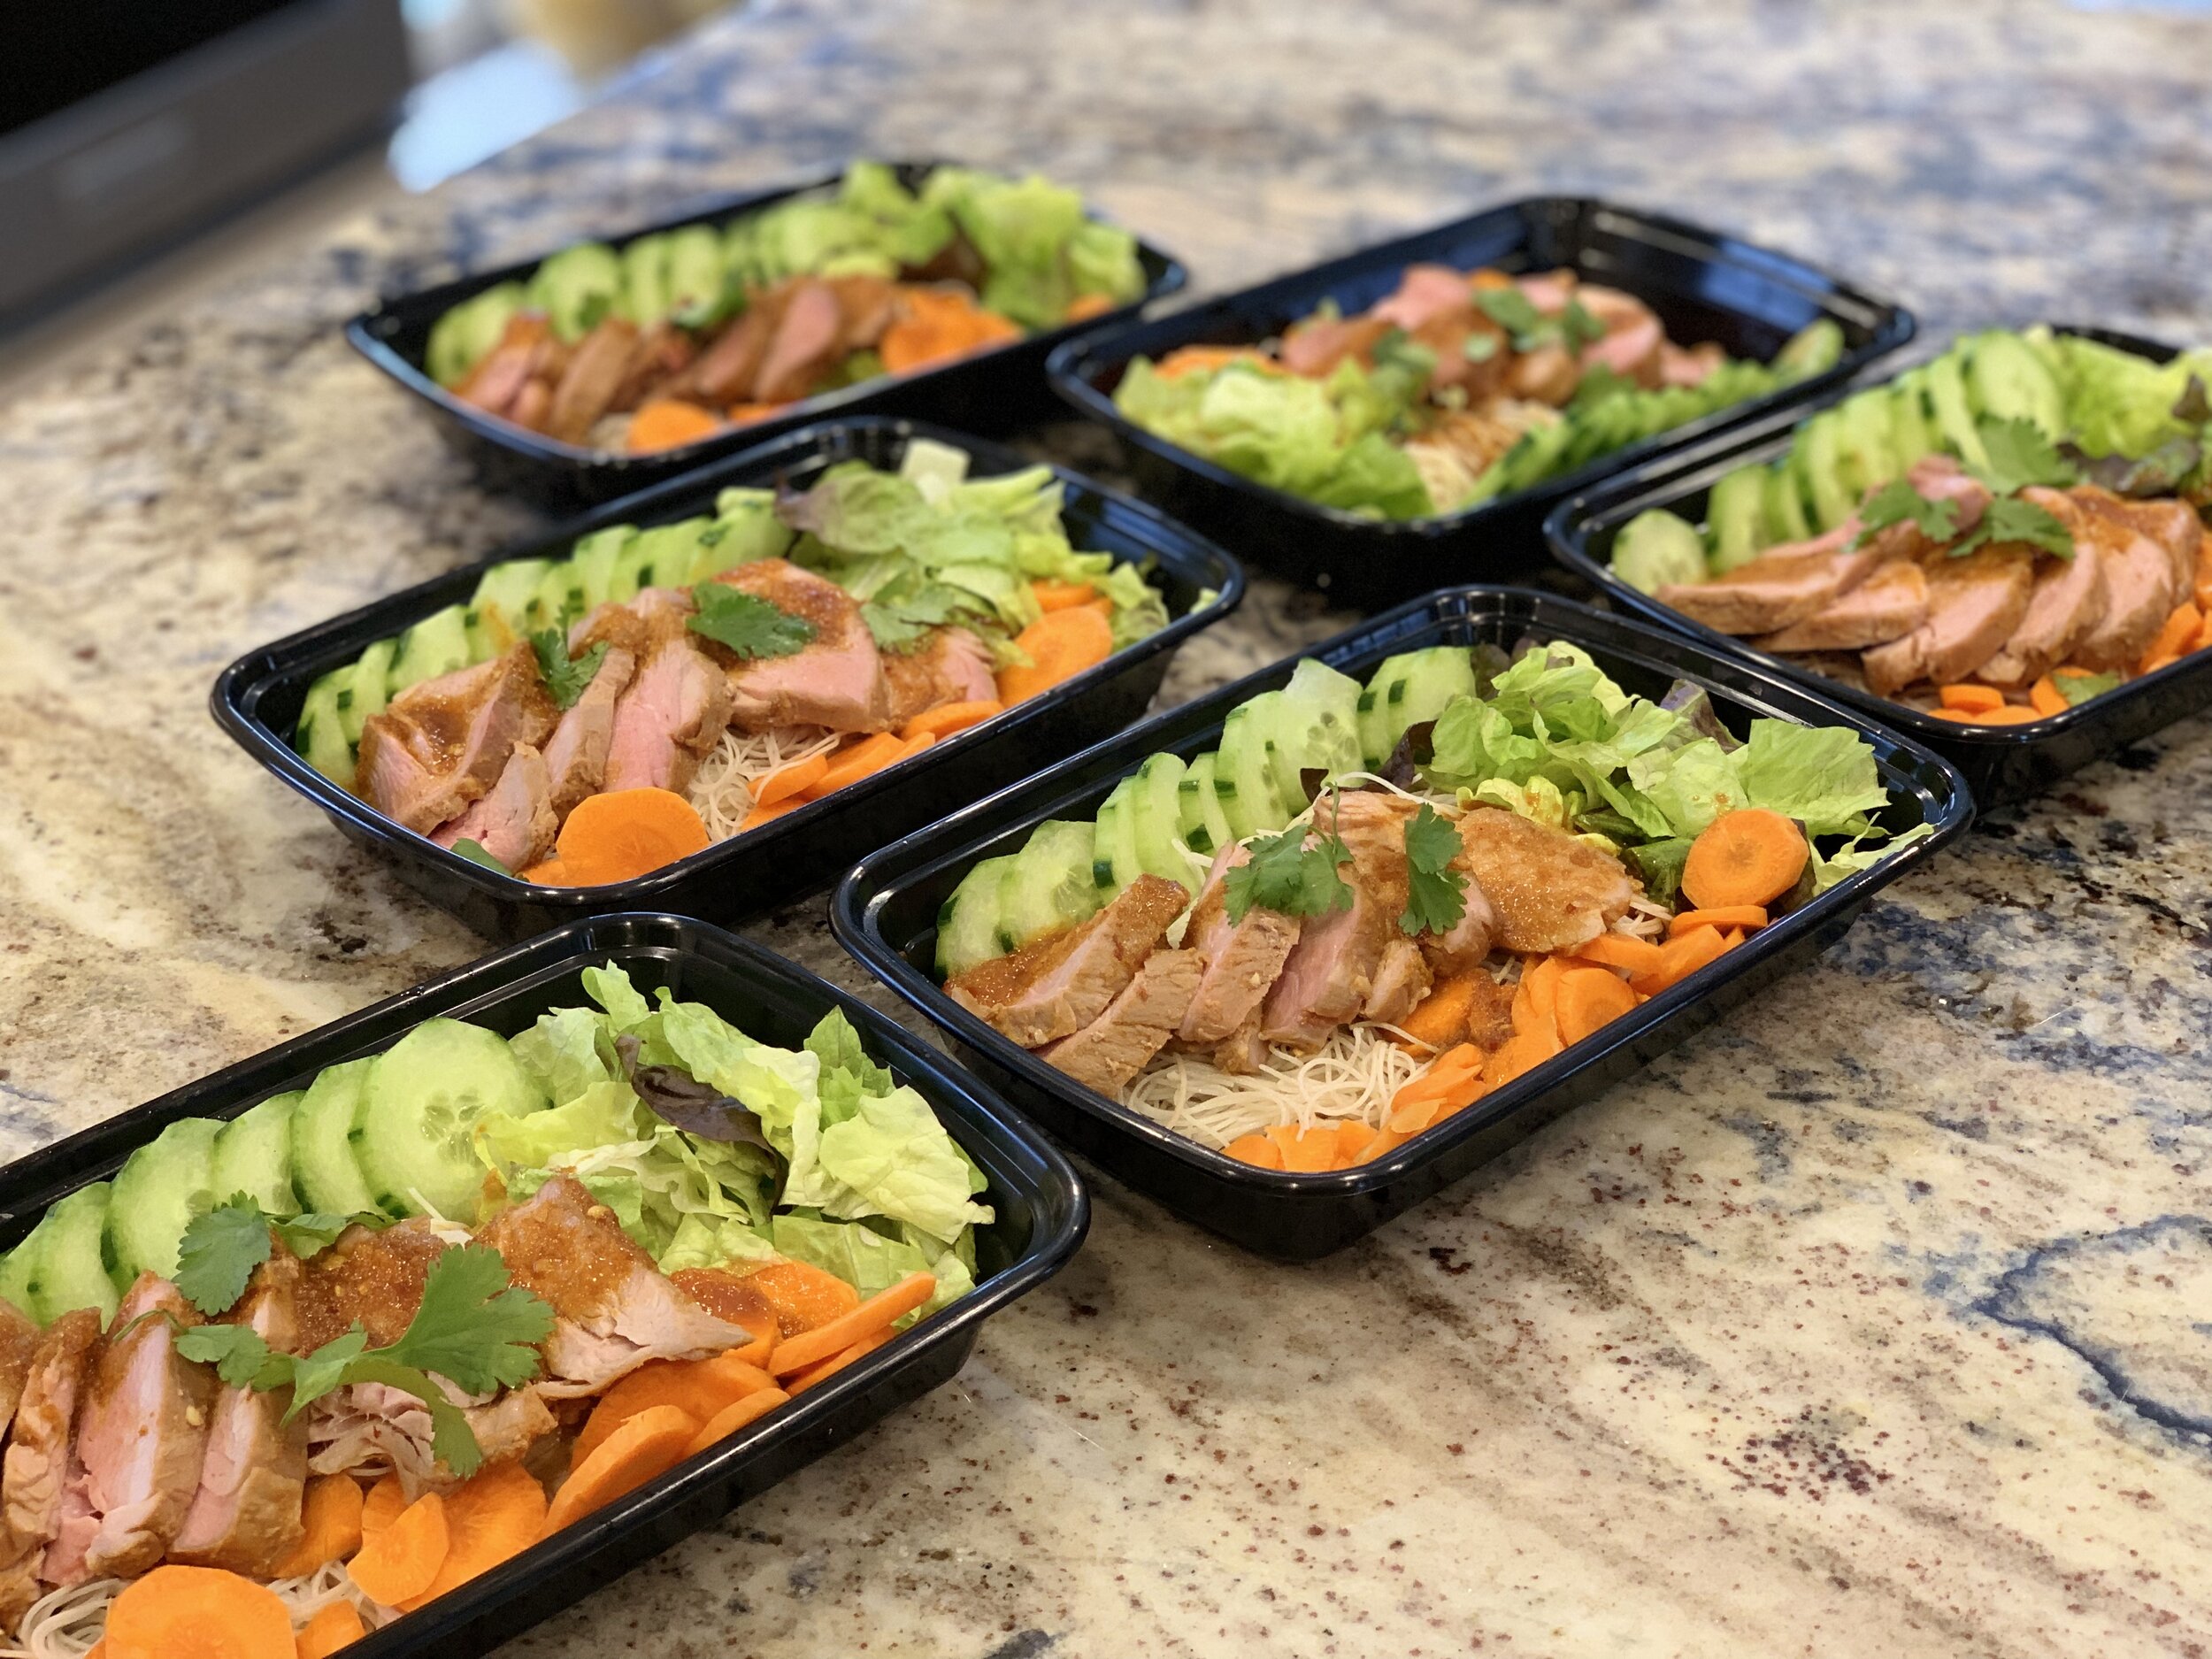 Meal Prep - Vail Valley - Personal Chef